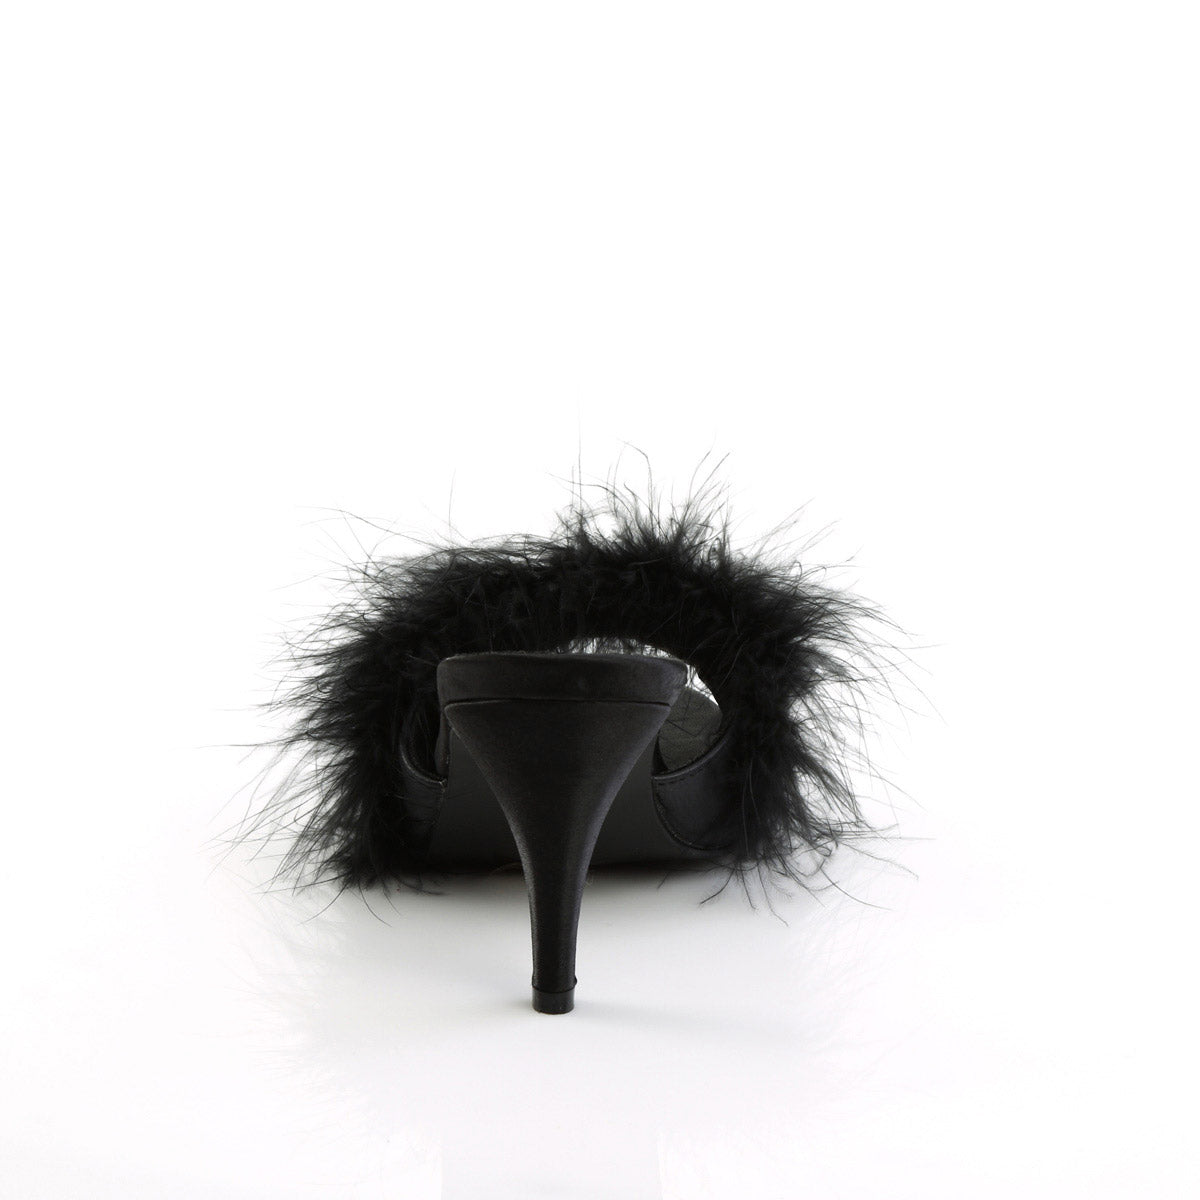 Cute Fluffy Marabou Trim Upper High Heels Mule Slippers Shoes Pleaser Fabulicious AMOUR/03